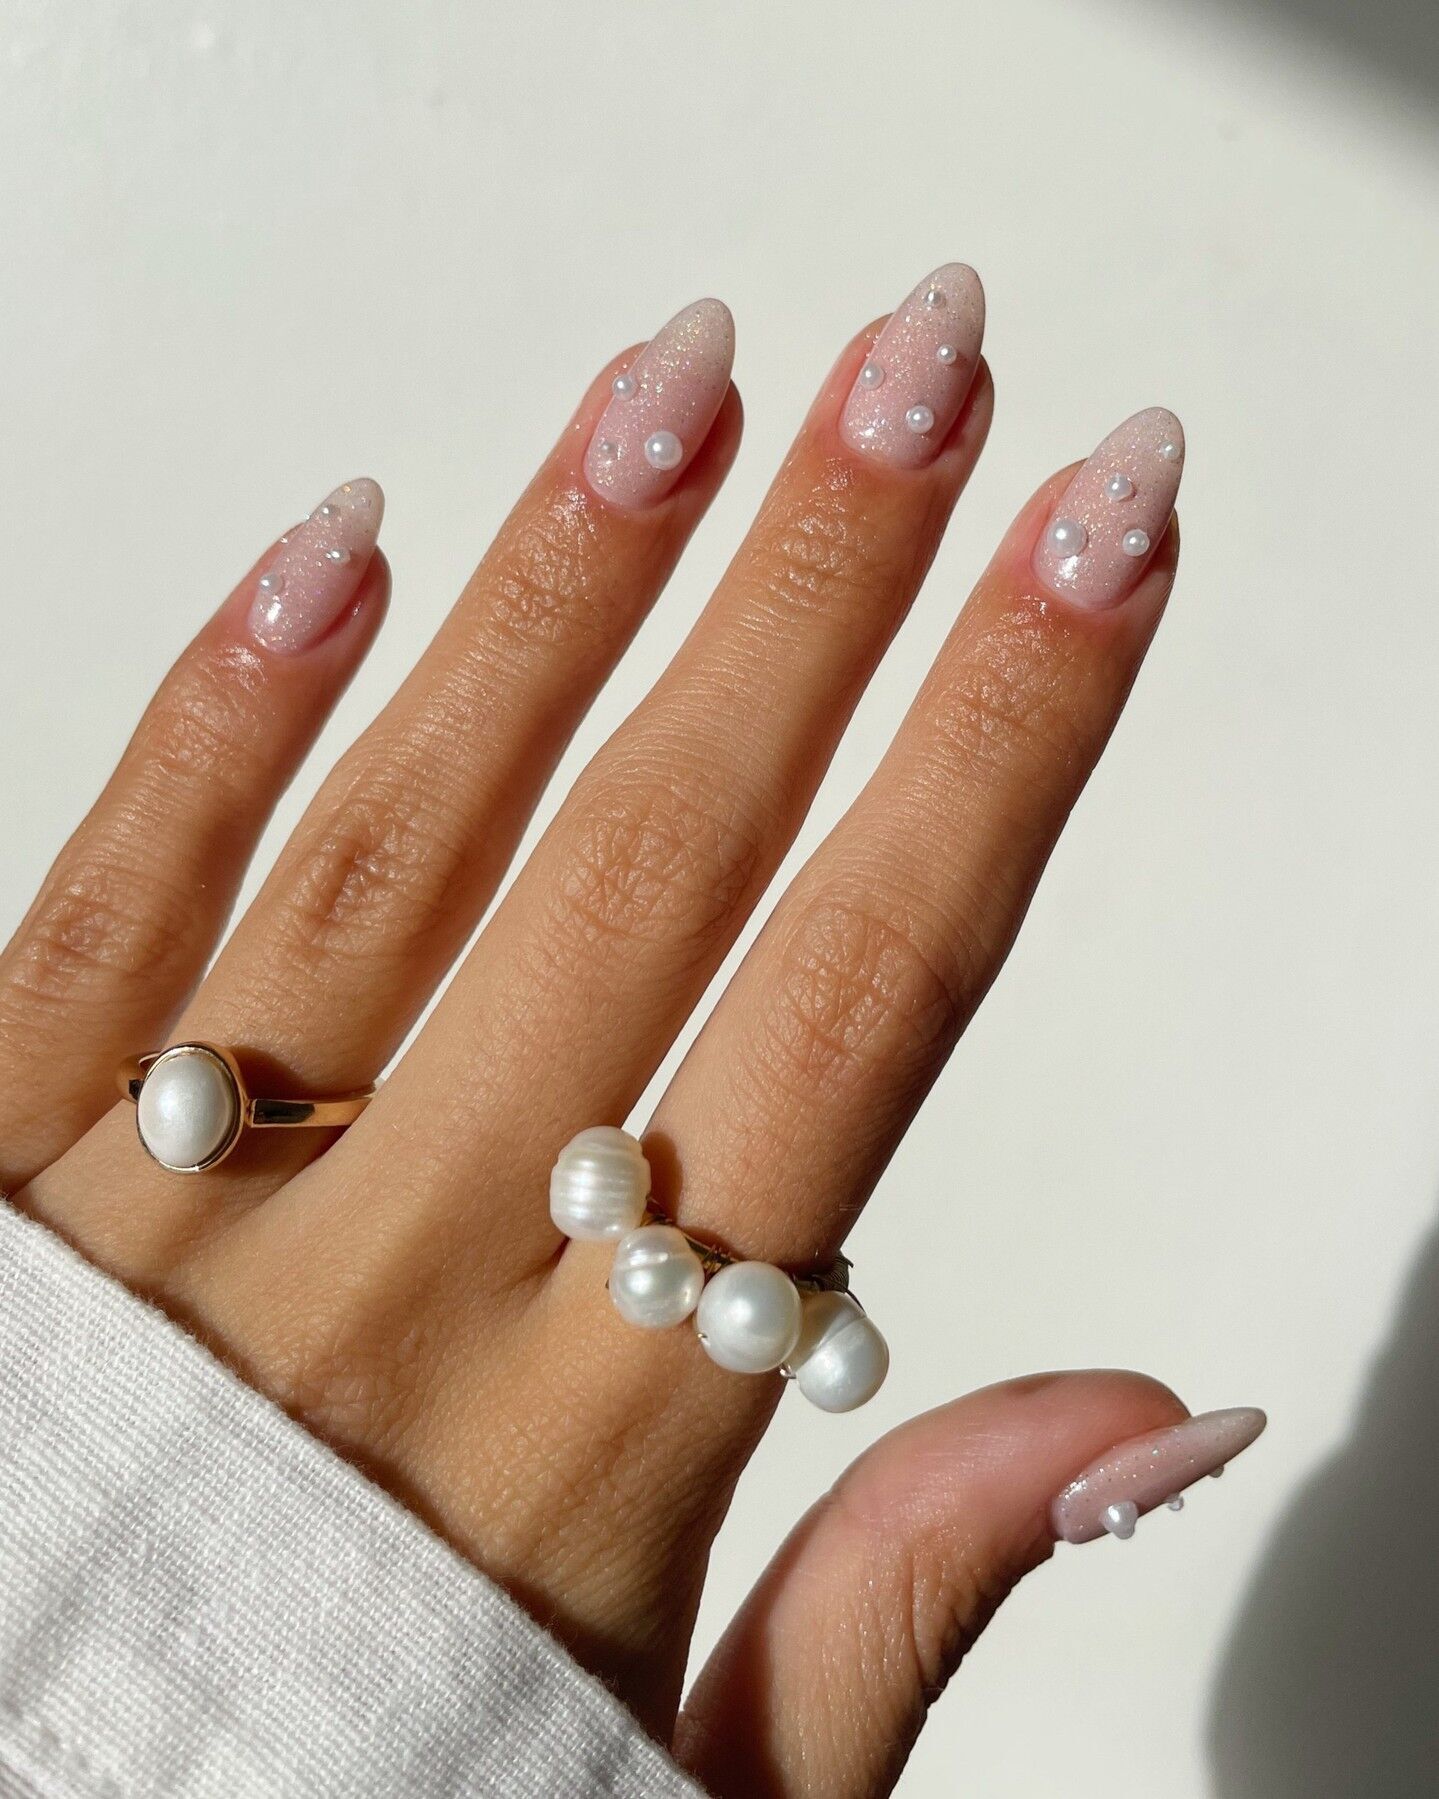 New Year's manicure: 5 designs that are long outdated